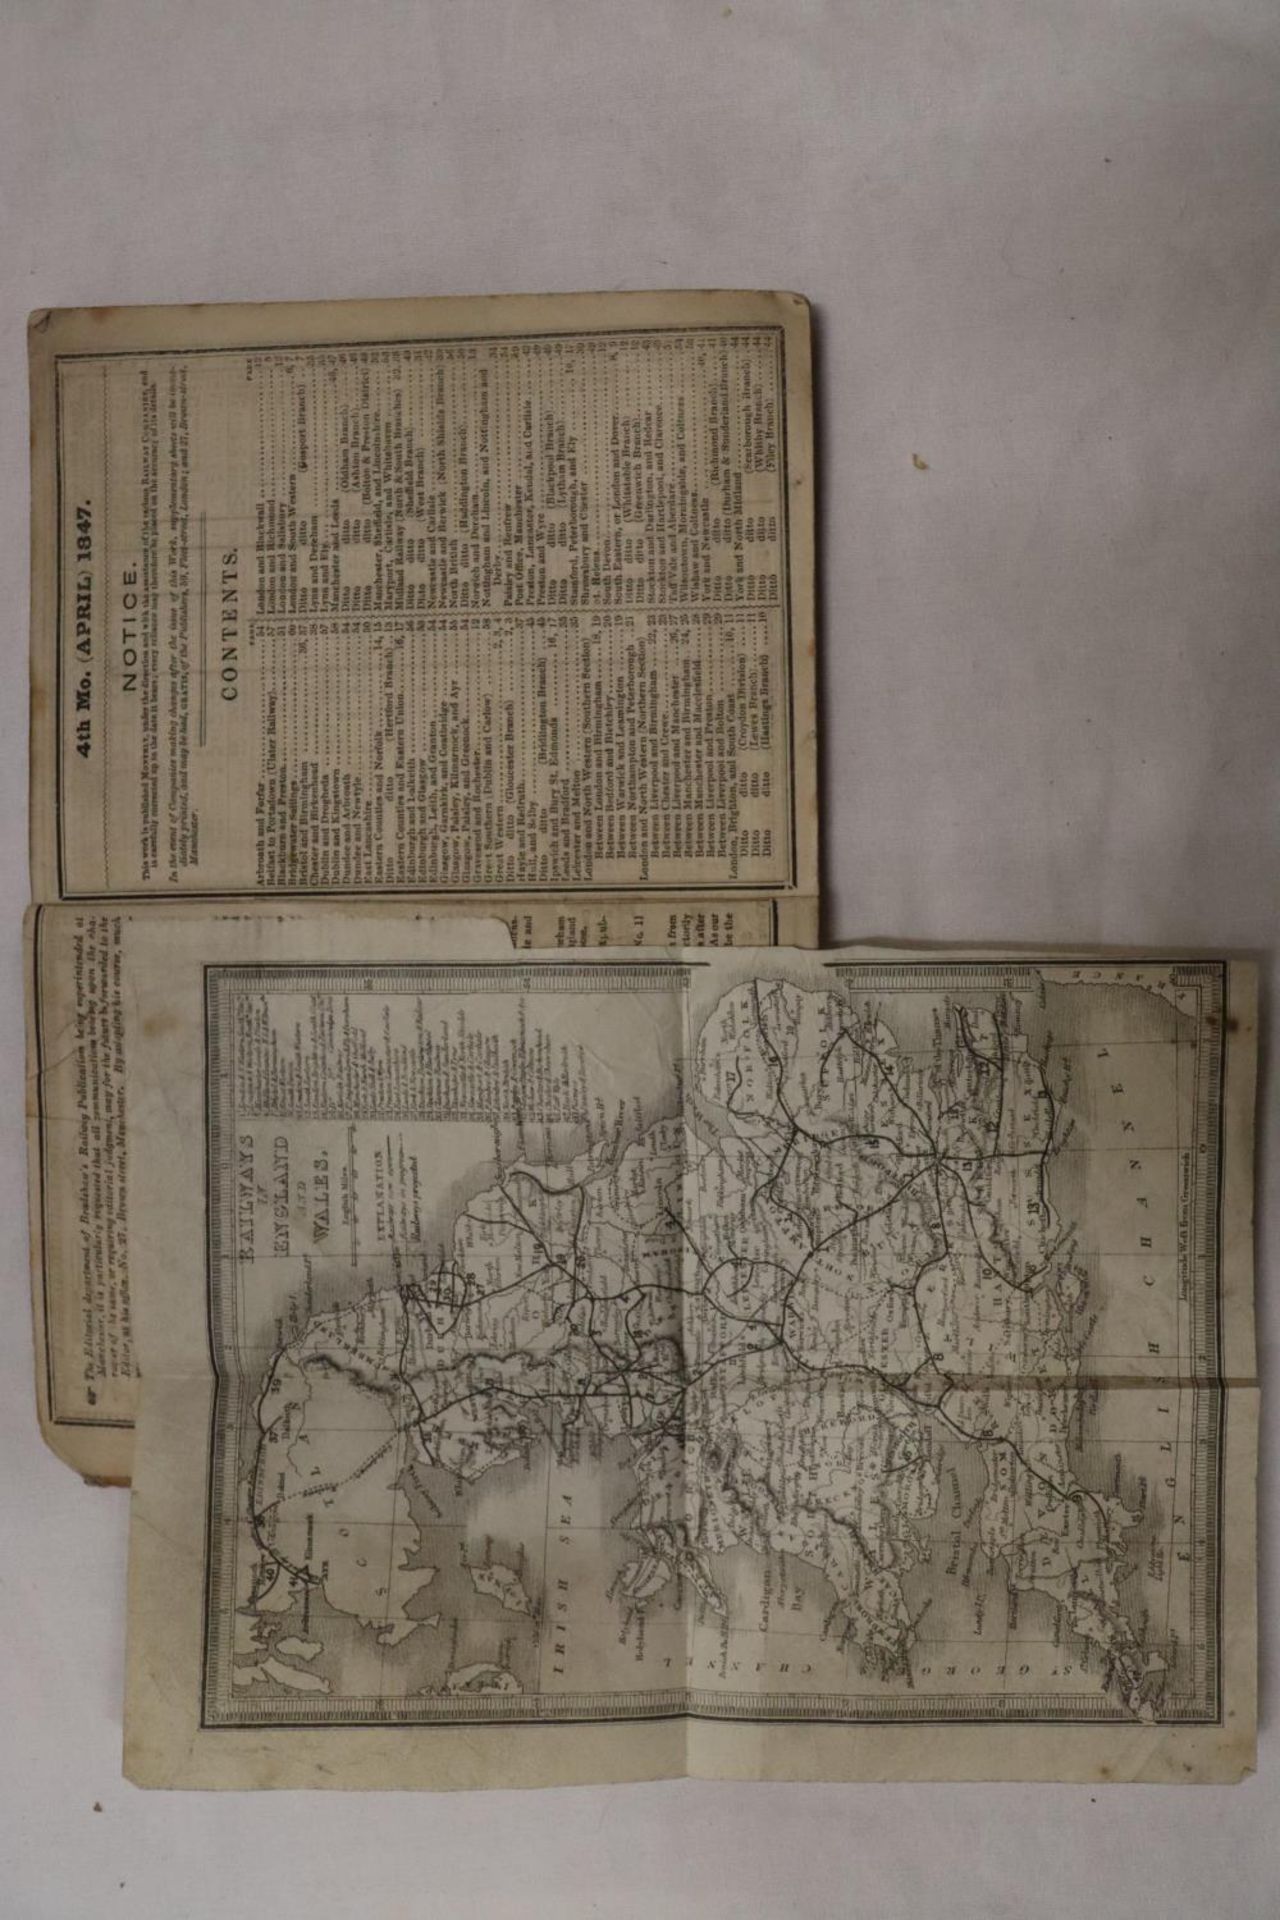 A BRADSHAWS MONTHLY RAILWAY GUIDE DATED APRIL 1847, PAPERBACK VERSION AND A FOLD OUT RAILWAY MAP - Image 2 of 4